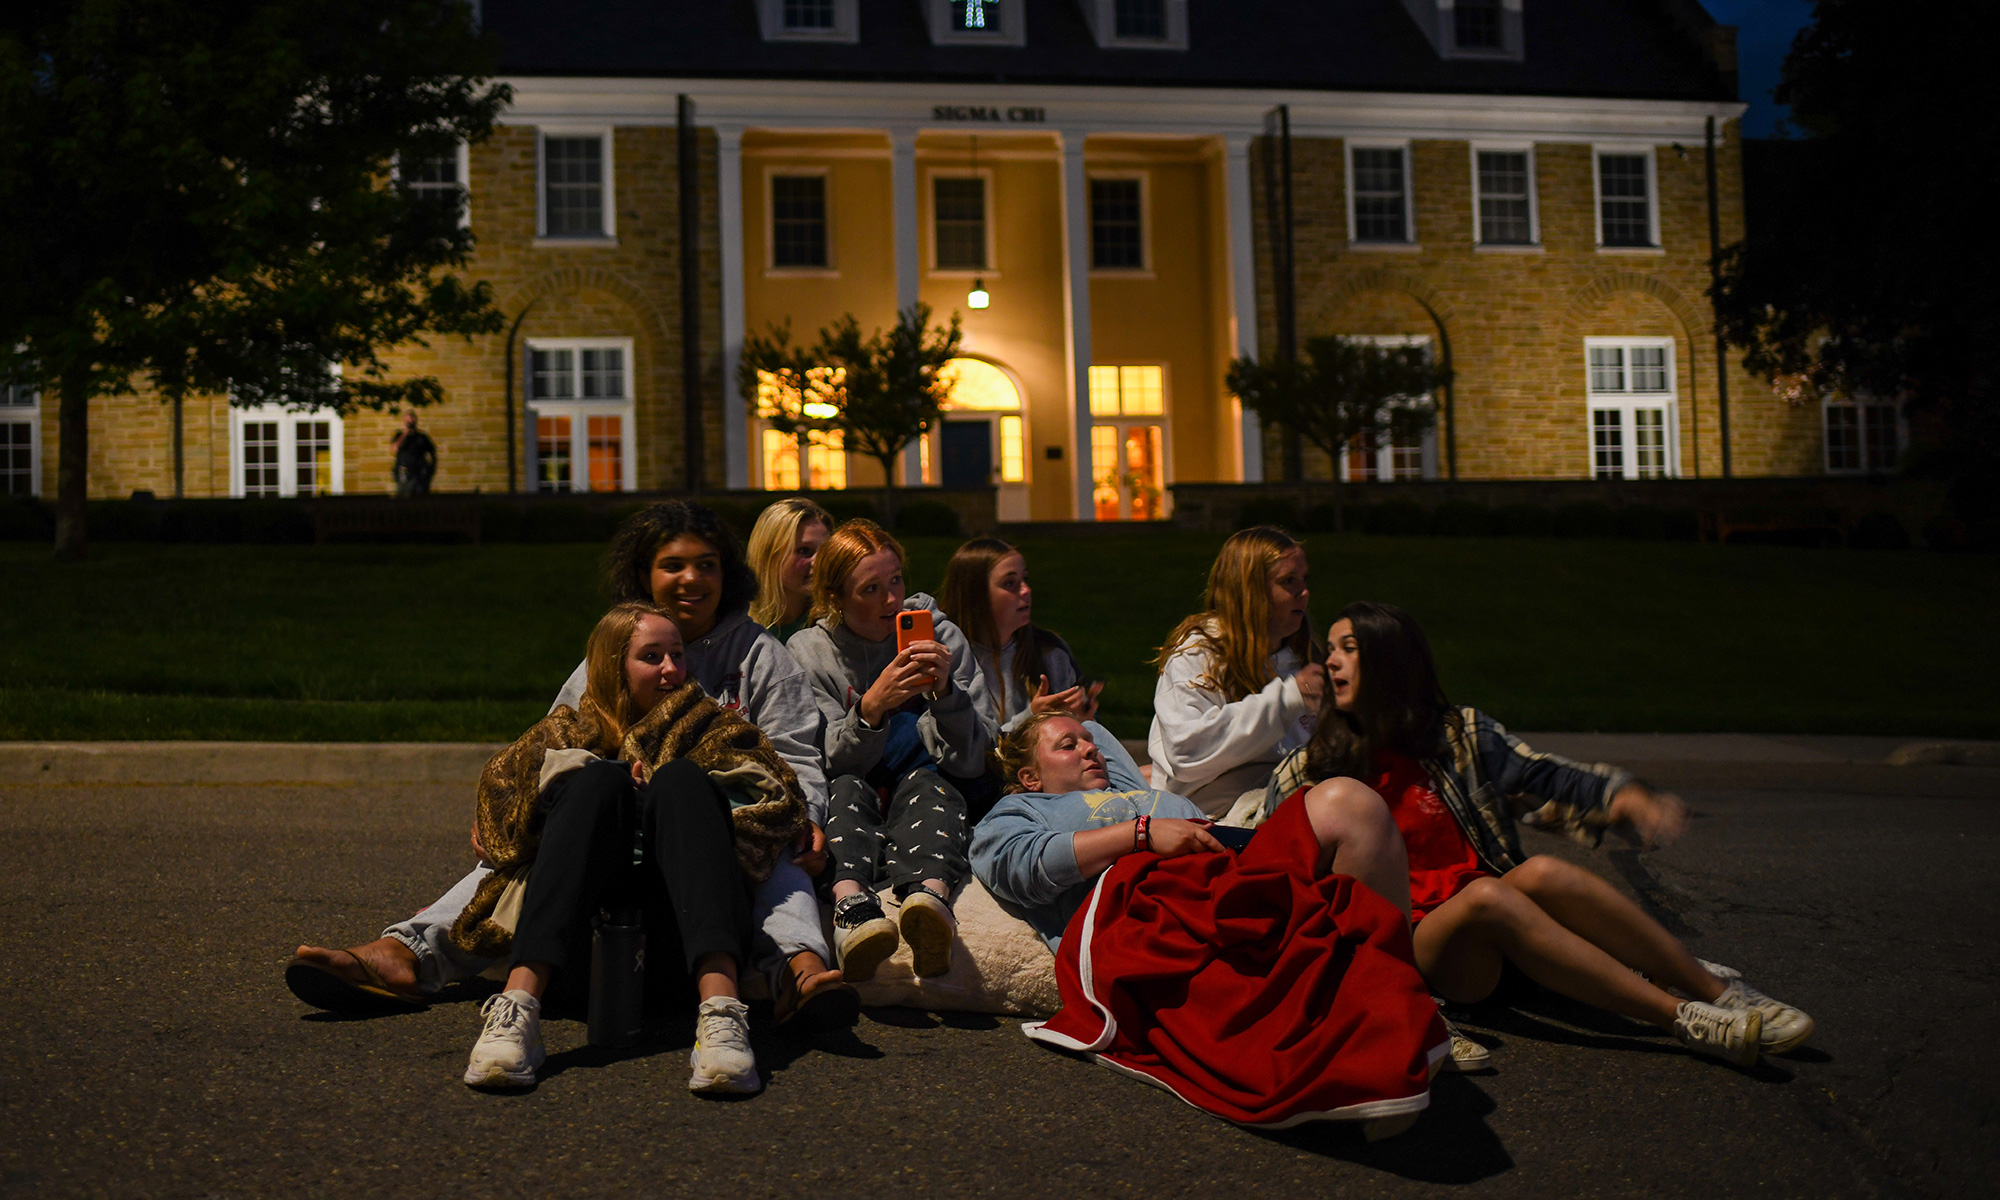 Students waiting for the sunrise outside Sigma Chi